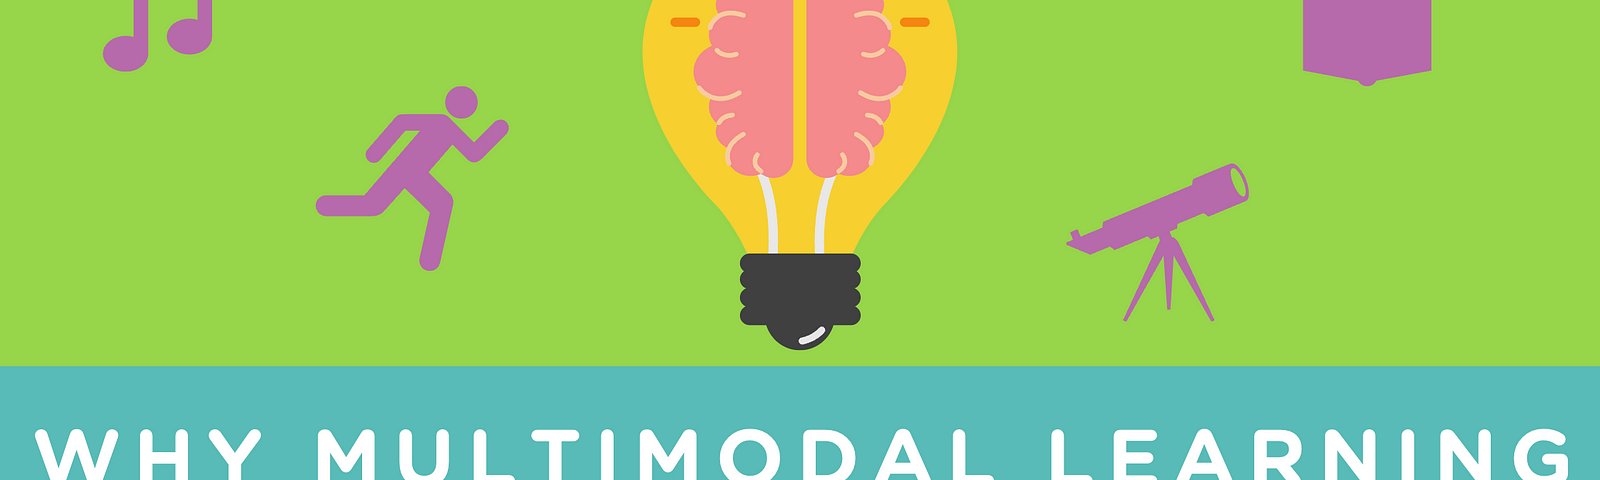 A pink brain sits inside a yellow lightbulb on a green background. Around it, simple purple icons of musical notes, a human running, a telescope, and an open book. Below, on a blue background: “WHY MULTIMODAL LEARNING BEATS LEARNING STYLES” and below, the white Classkick logo. At bottom, on an orange sliver: “AND HOW CLASSKICK MAKES IT FAST AND EASY”